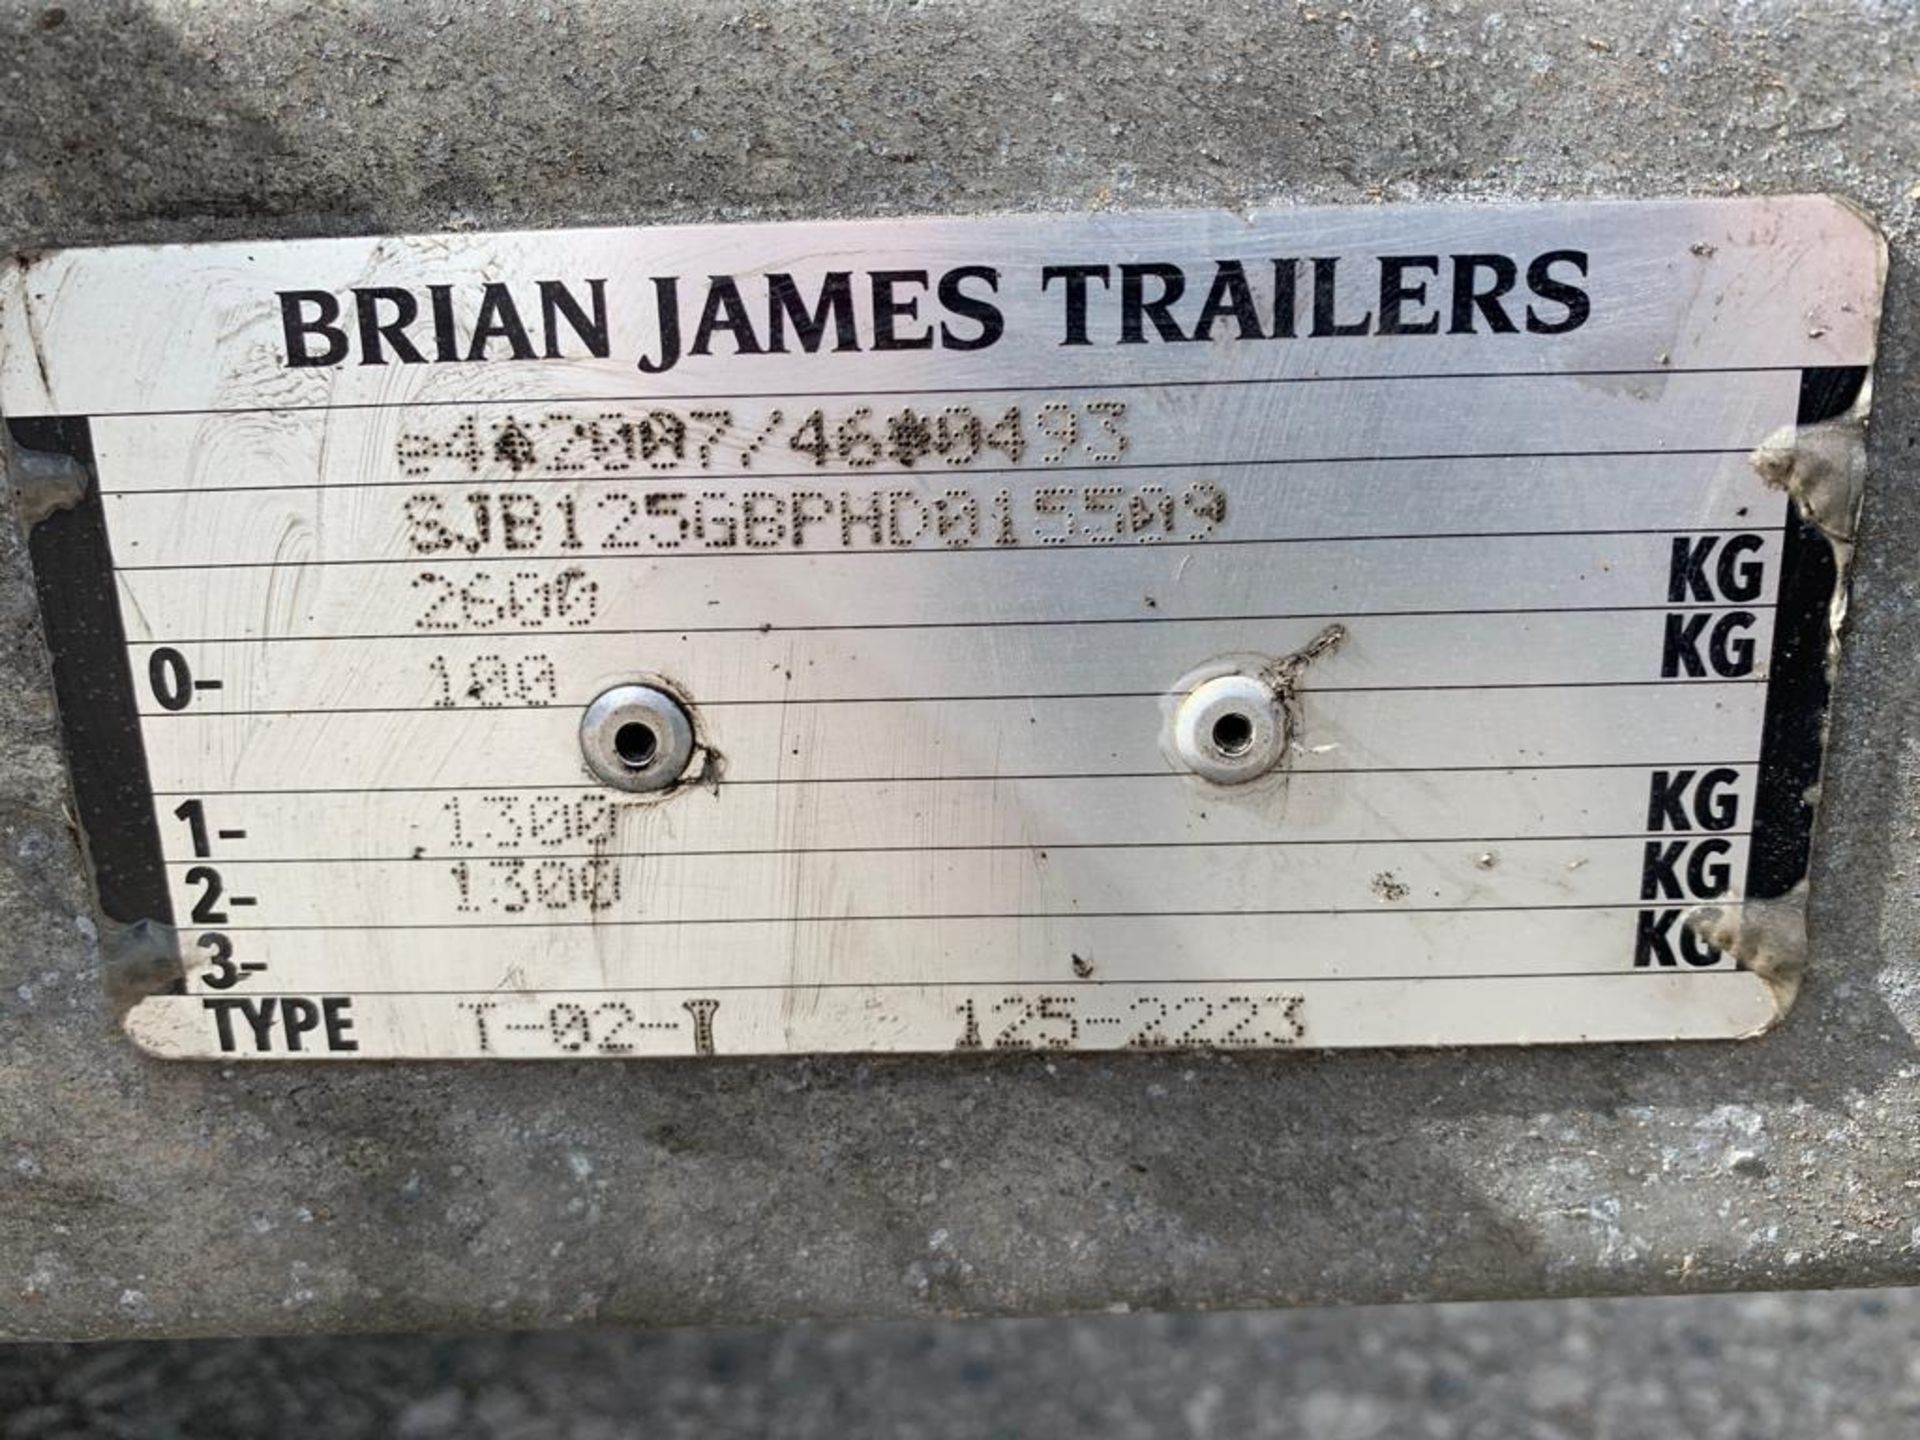 2018 BRIAN JAMES TRAILERS TWIN AXLE 2600KG VEHICLE TRAILER WITH WHEEL RACK & STORAGE *PLUS VAT* - Image 8 of 9